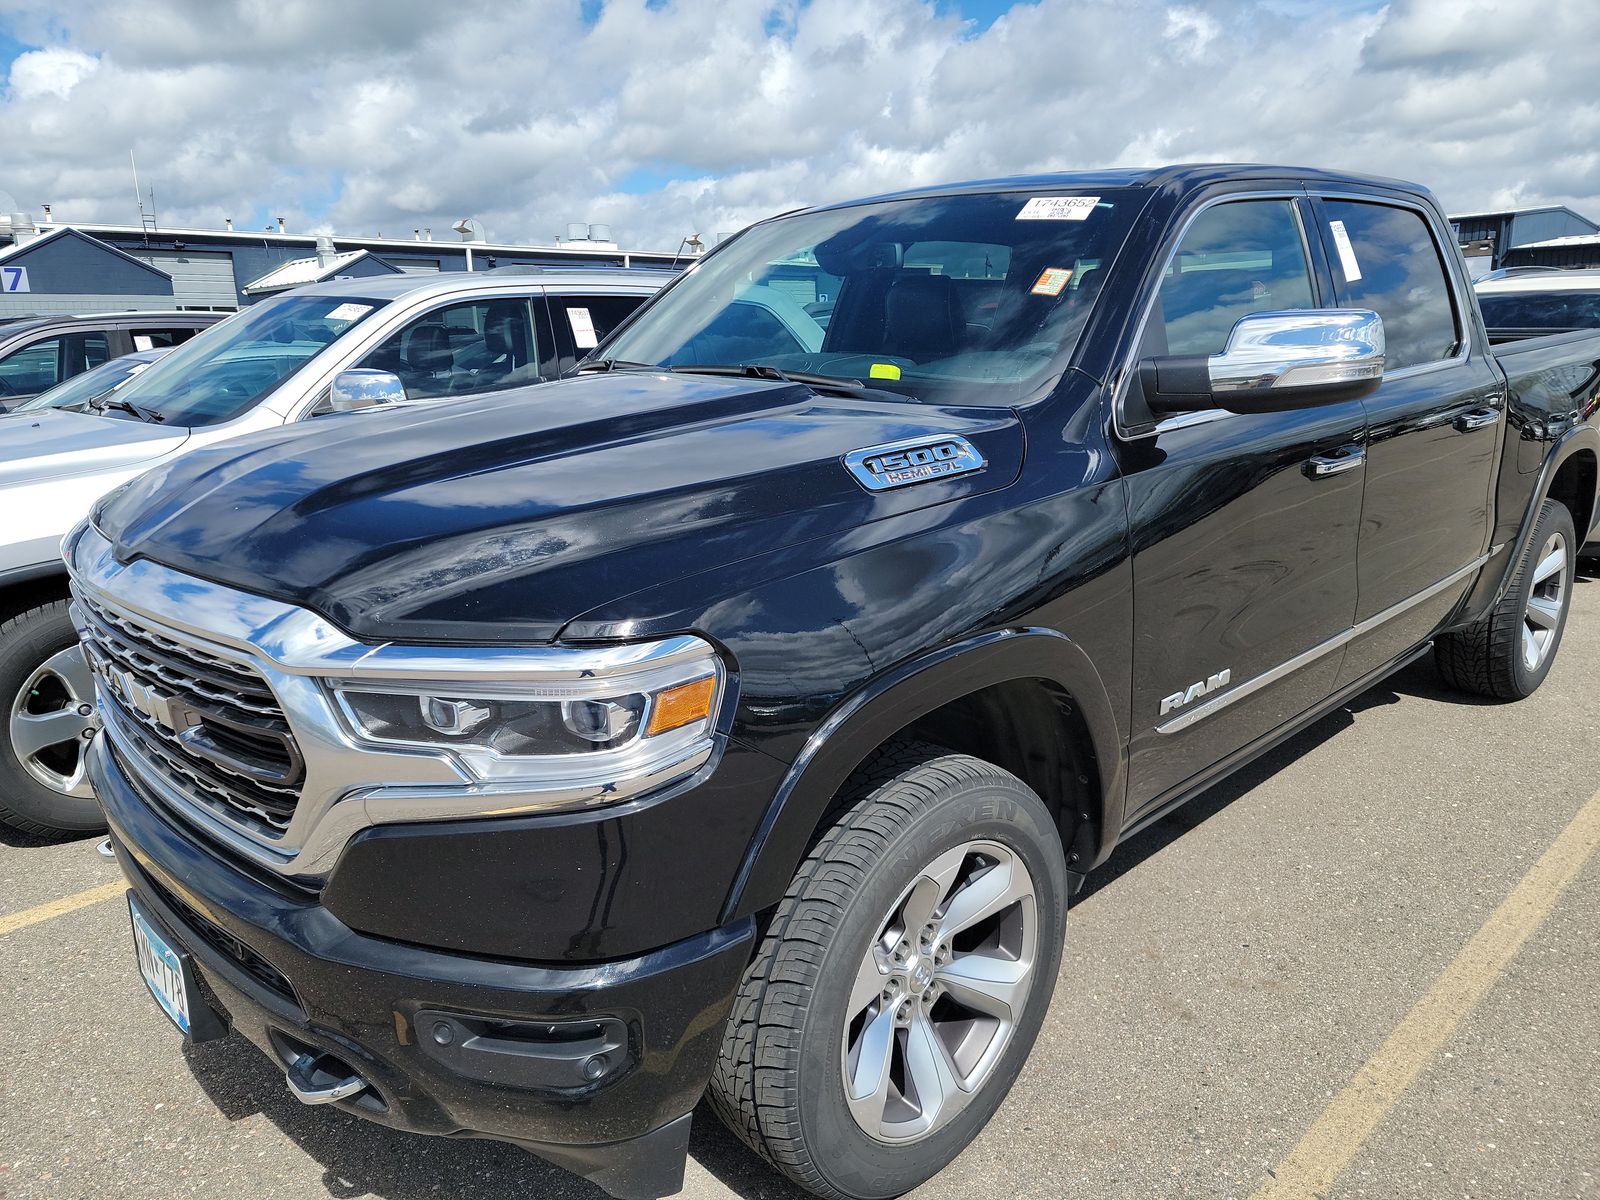 Used 2020 Ram 1500 Limited with VIN 1C6SRFHT1LN394736 for sale in Minneapolis, Minnesota